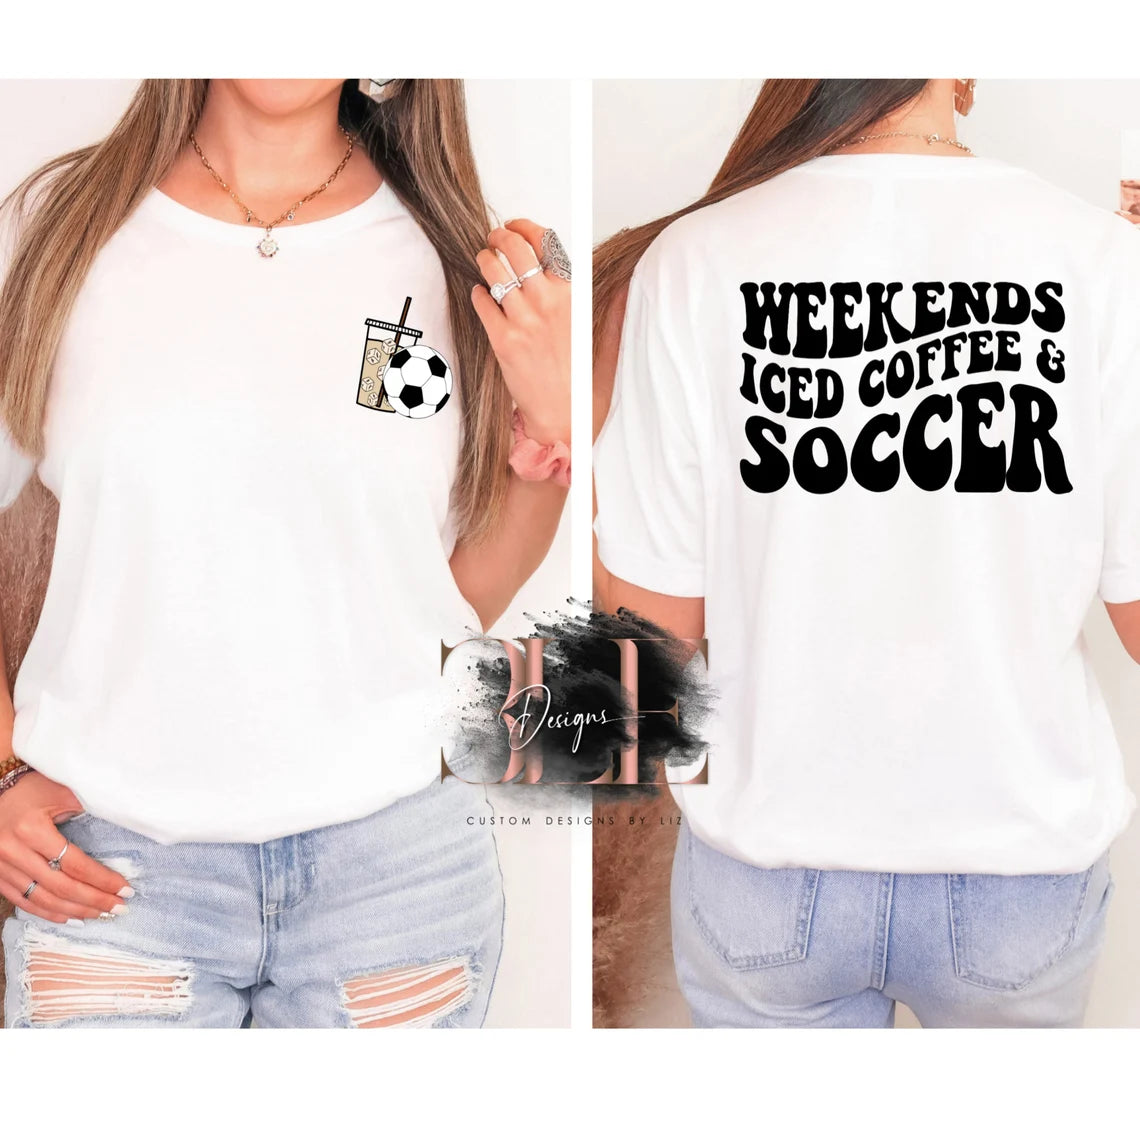 Weekends Ice Coffee & Soccer Graphic T-Shirt, Soccer Mom Sports Mom Shirt, Soccer Gift For Woman, Soccer Shirt For Women, Cute Soccer Tee